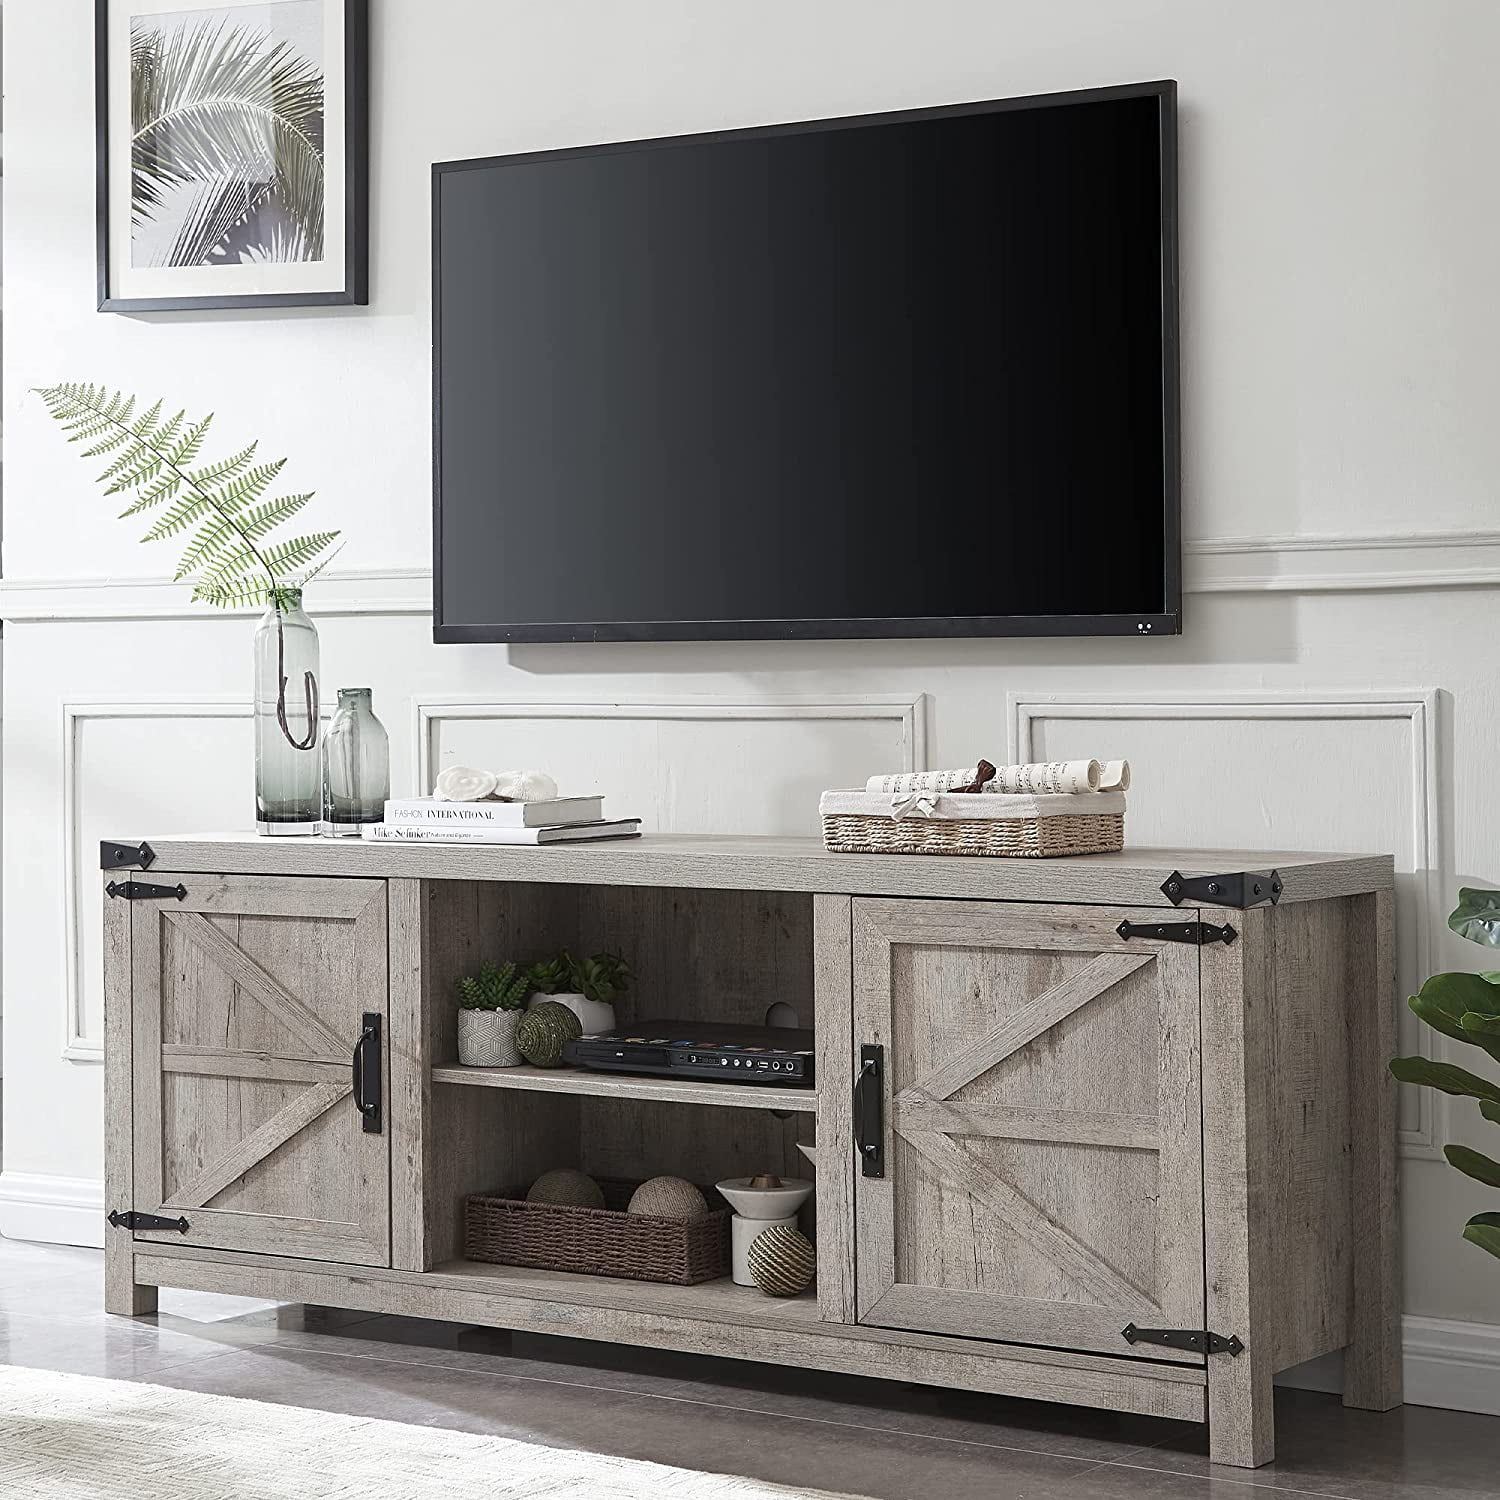 Okd Farmhouse Tv Stand For Tvs Up To 75 Inches, Wood Barn Door Media  Television Console Table With Storage Cabinets Shelves, Grey Wash –  Walmart Pertaining To Barn Door Media Tv Stands (View 2 of 15)